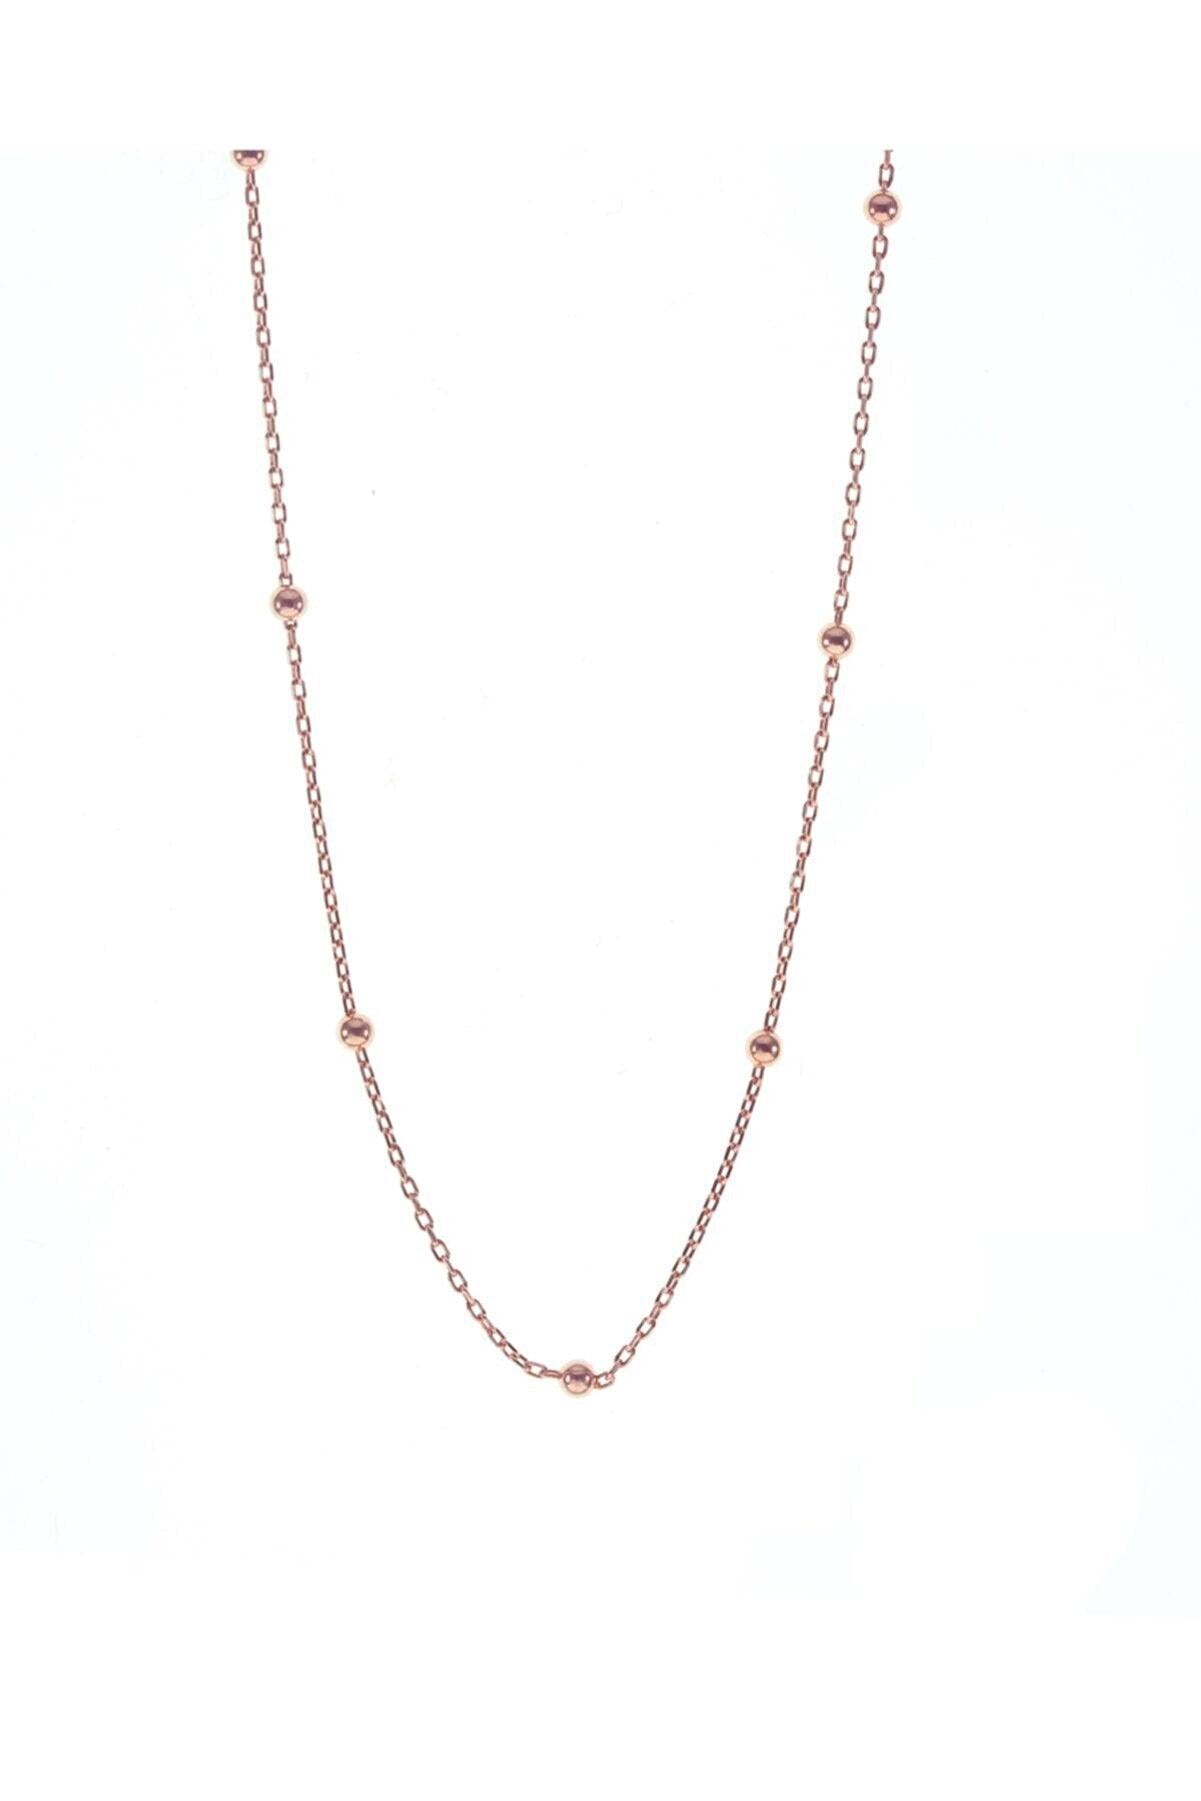 Bead Chain Bead Sterling Silver Necklace - Spero London